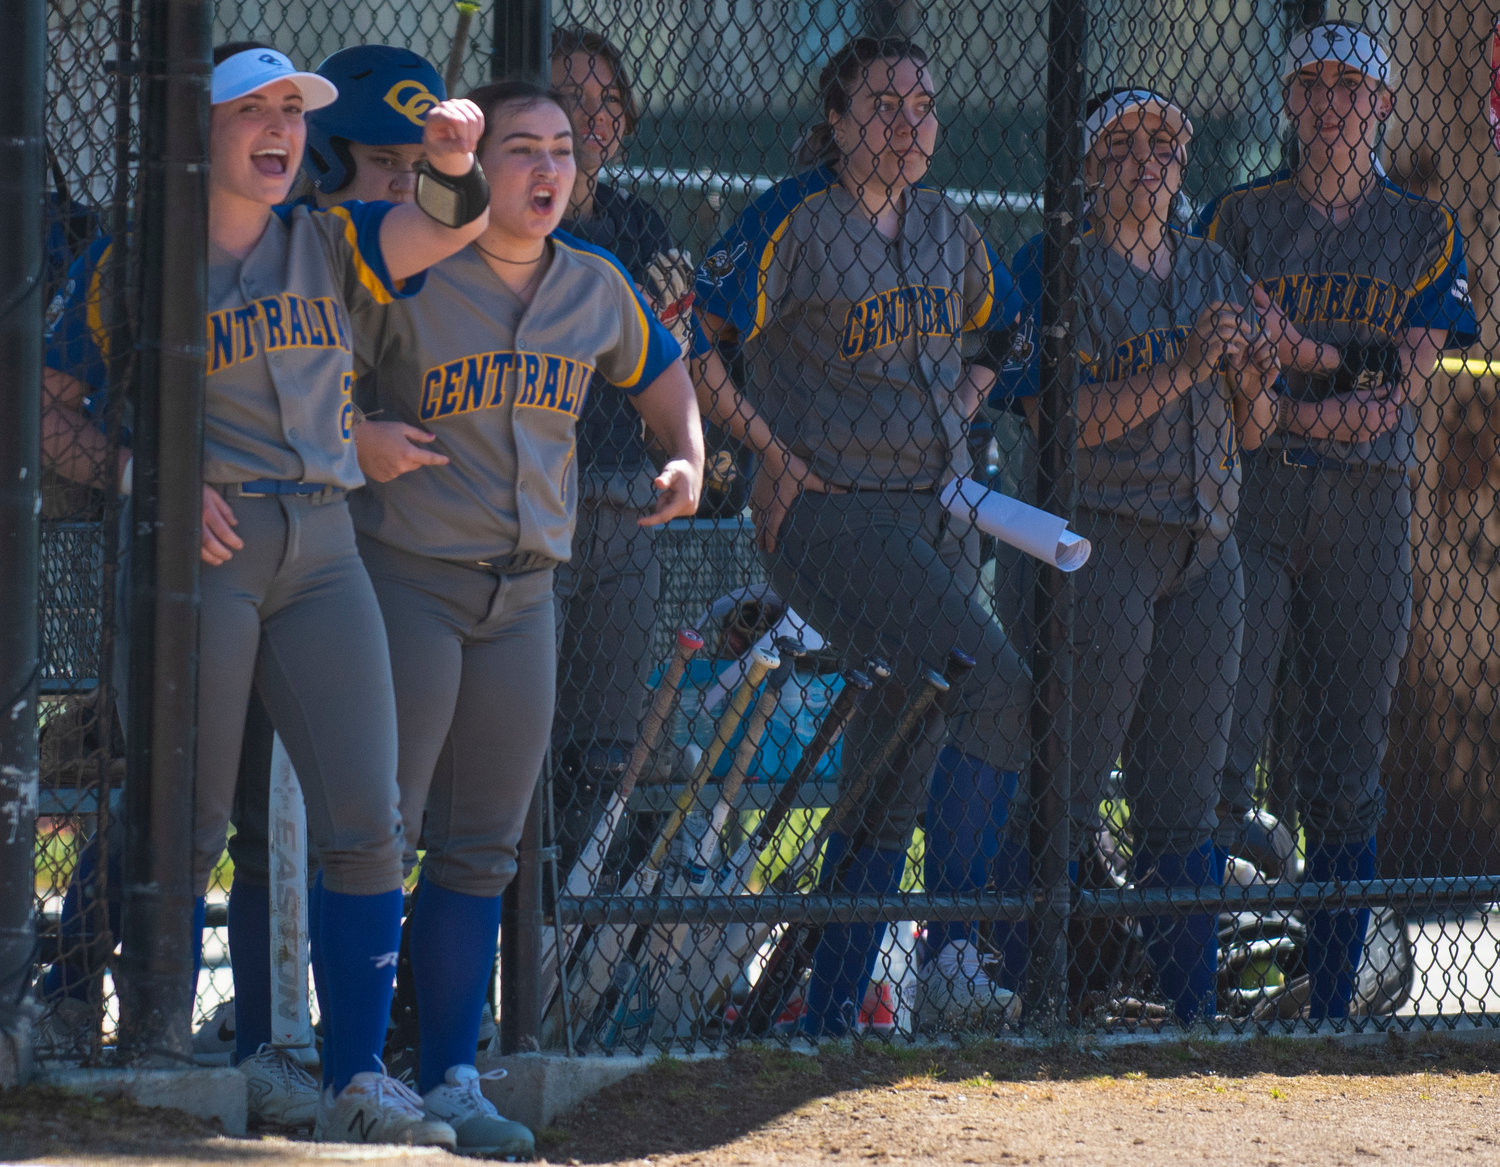 Centralia College players cheer from the dugout during their game against Lower Columbia on Monday.